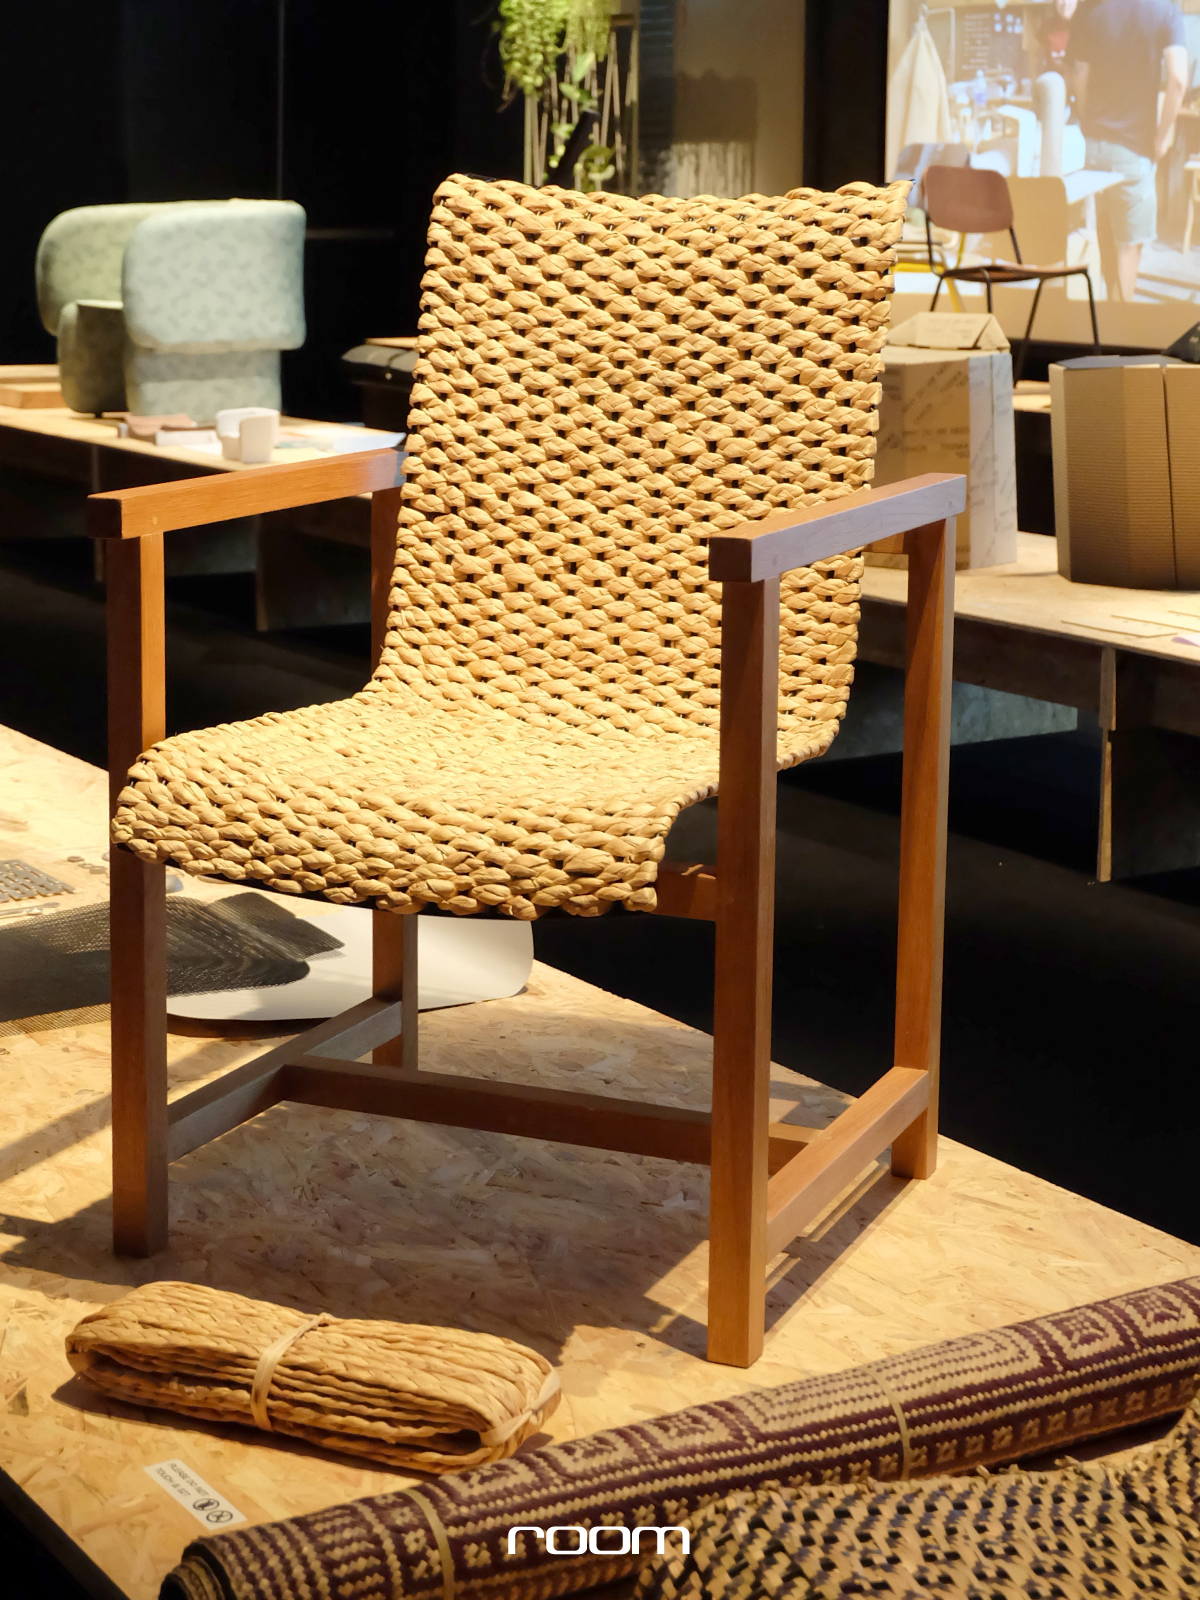 THINKK Together WHY DO WE NEED ANOTHER CHAIR? Bangkok Design Week 2020